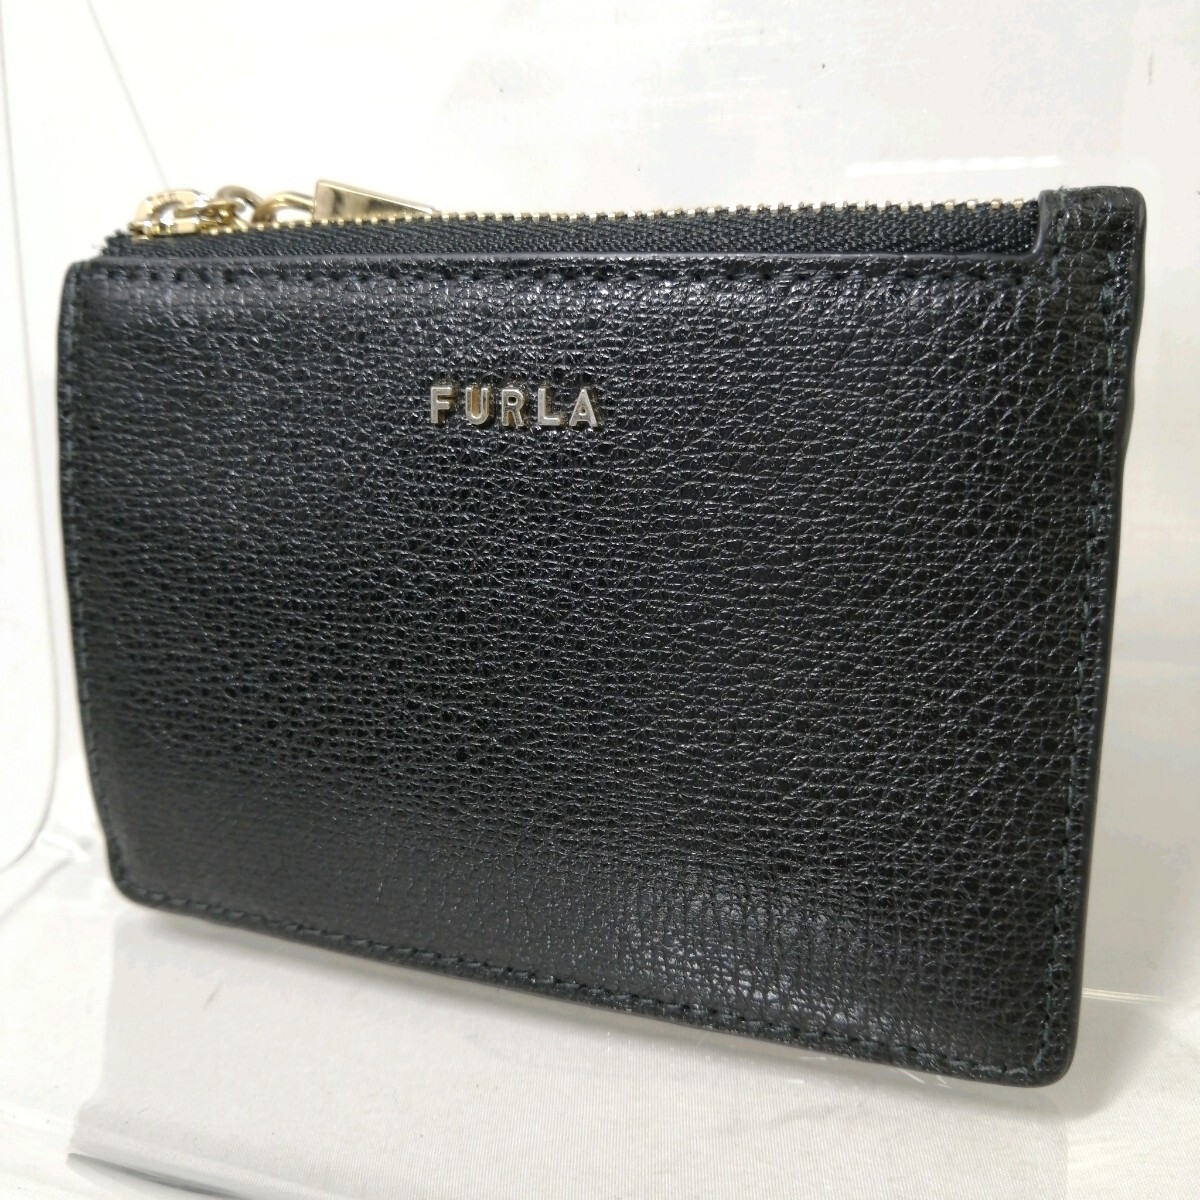 A Φ[ commodity rank :B] Furla FURLA Logo metal Gold metal fittings leather key ring attaching Pas / card-case business card / ticket holder black black series 